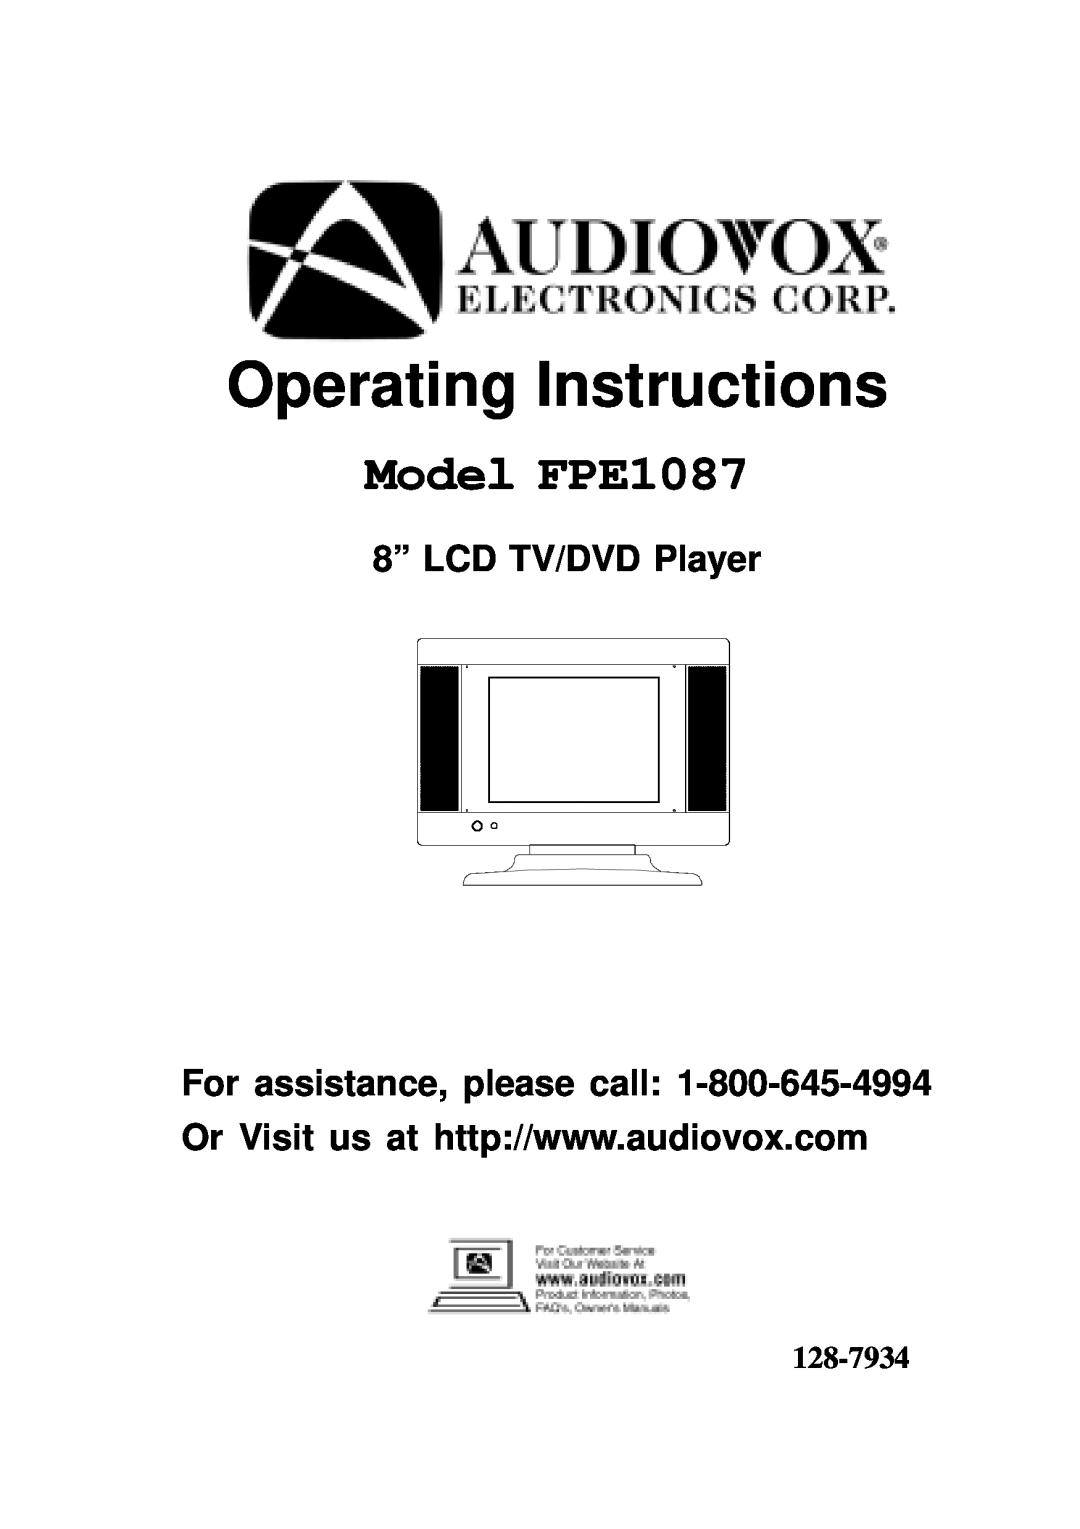 Audiovox operating instructions Operating Instructions, Model FPE1087, 8” LCD TV/DVD Player, 128-7934 